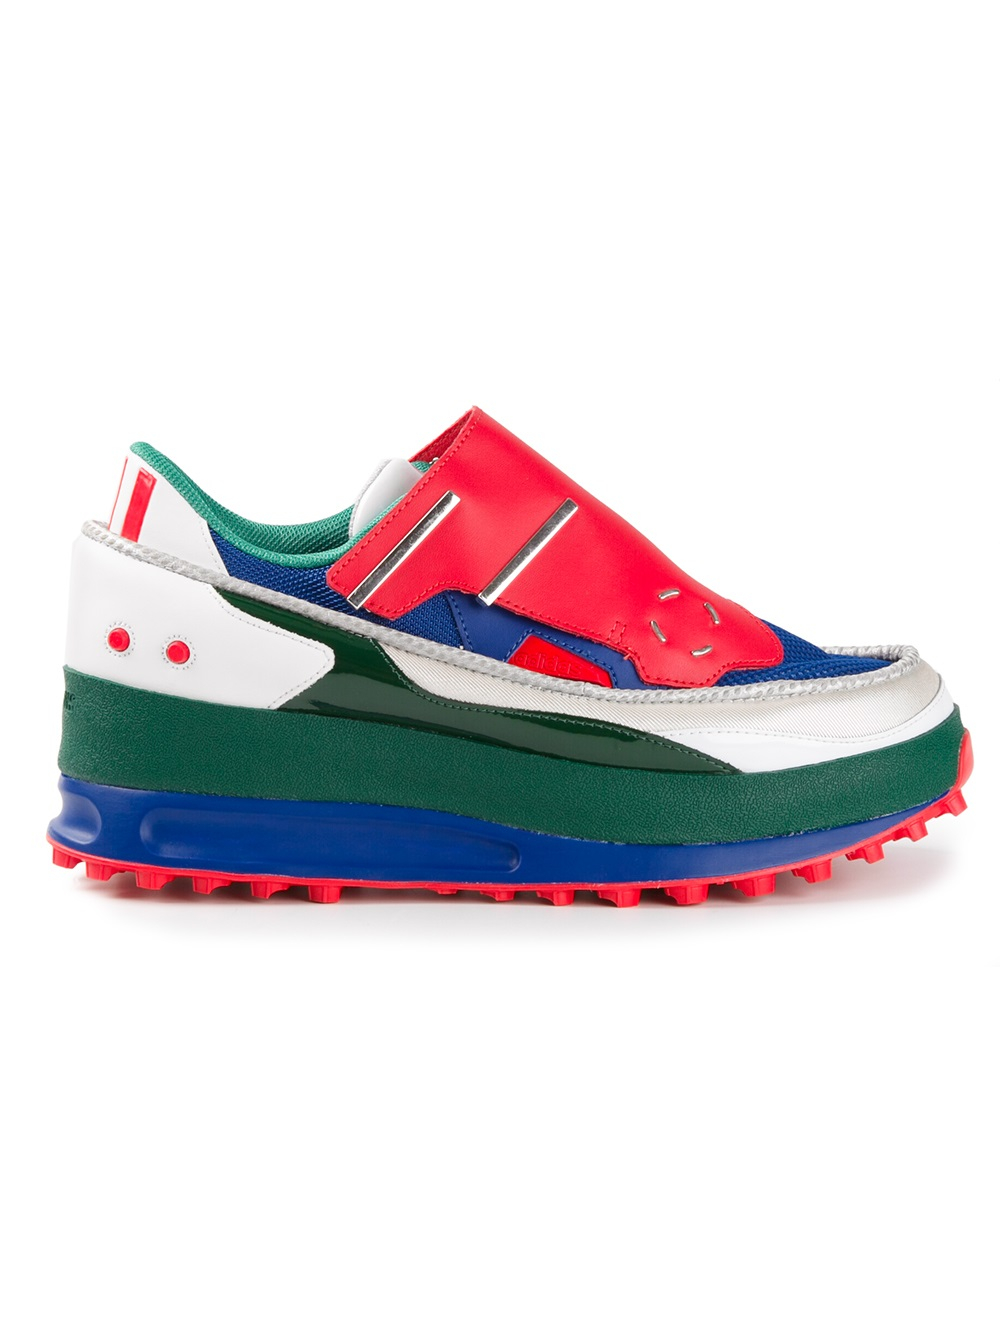 adidas By Raf Simons Bunker Sneakers for Men - Lyst